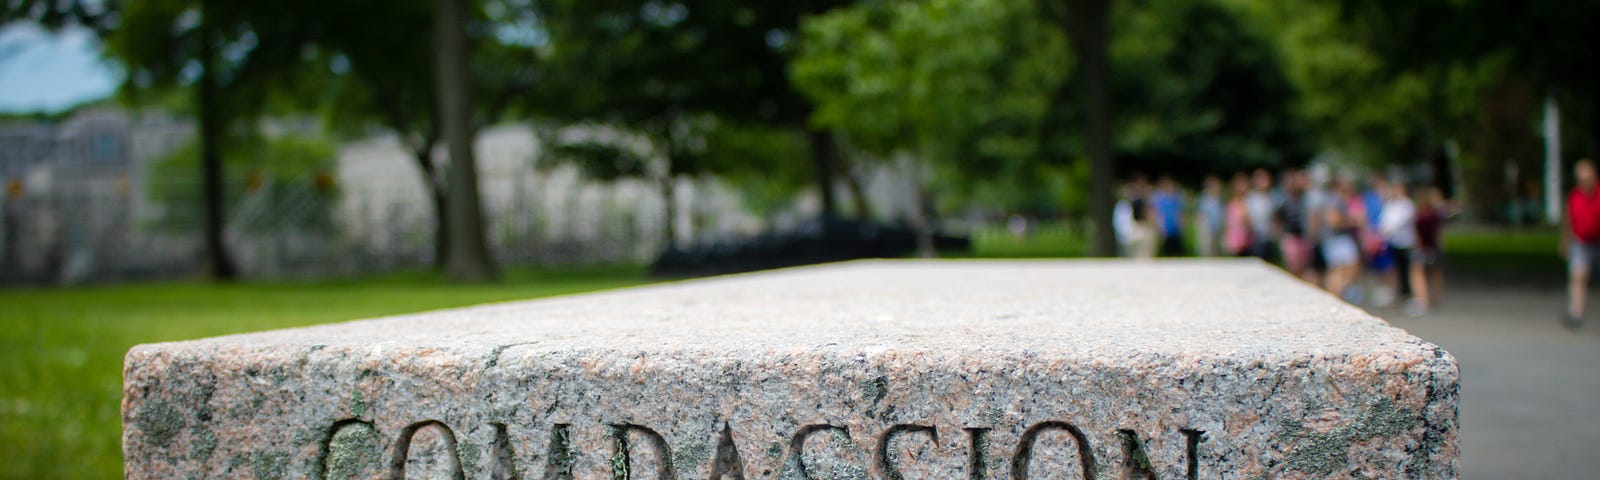 ‘Compassion’ engraved into the side of a stone bench in the park.